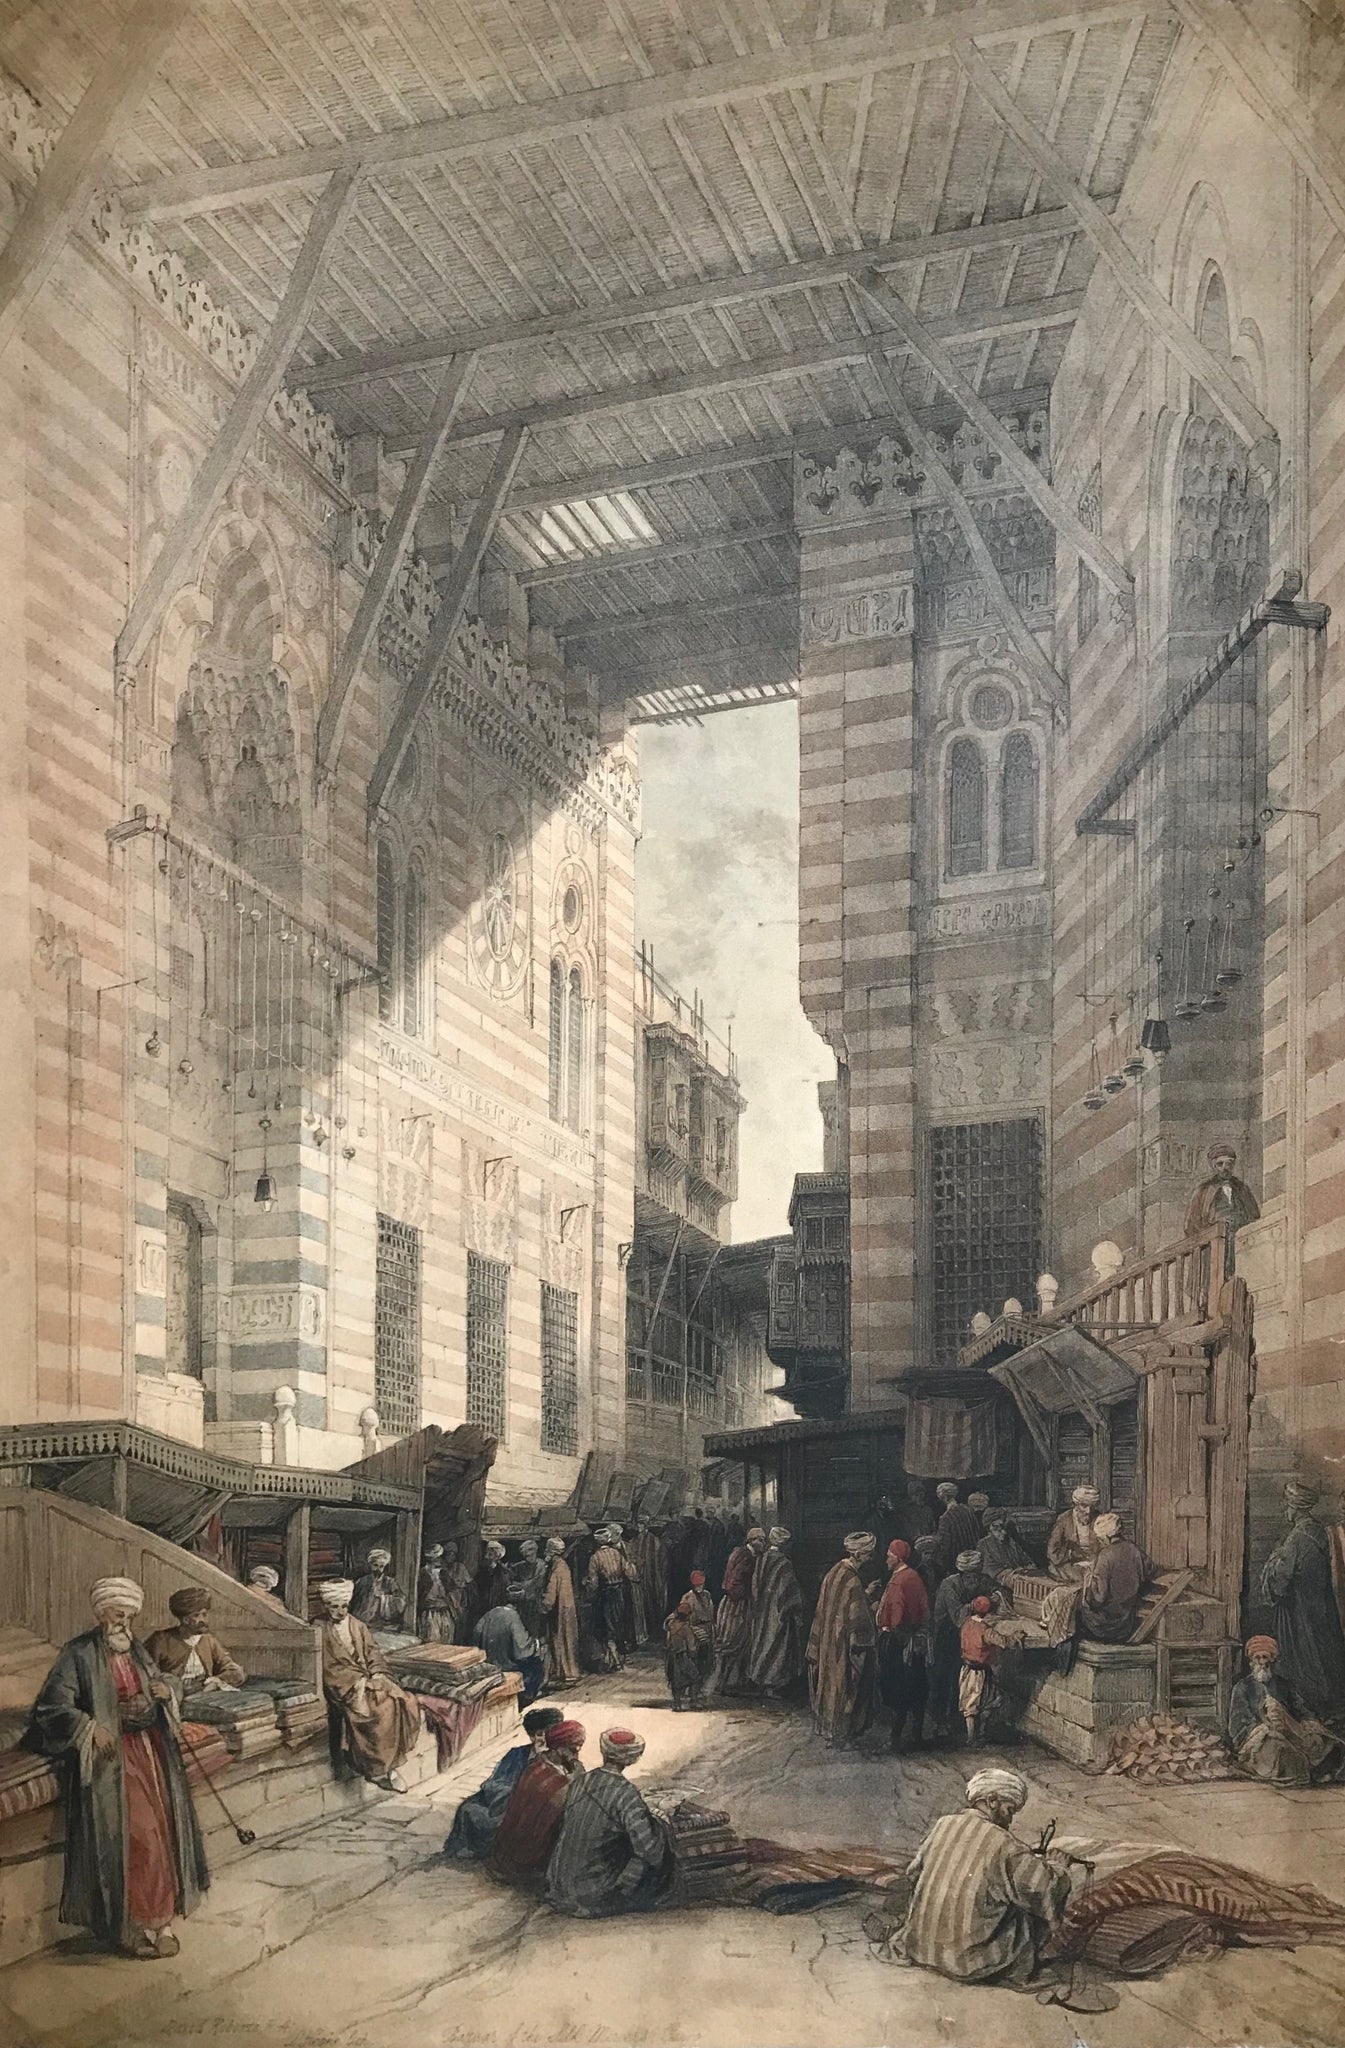 "Bazaar of the Silk Mercers, Cairo"  Lithograph by Louis Haghe (1806-1885). Printed in color after the painting by David Roberts (1796-1864)  Published in "Egypt & Nubia"  London, F.G. Moon, 1846-1849